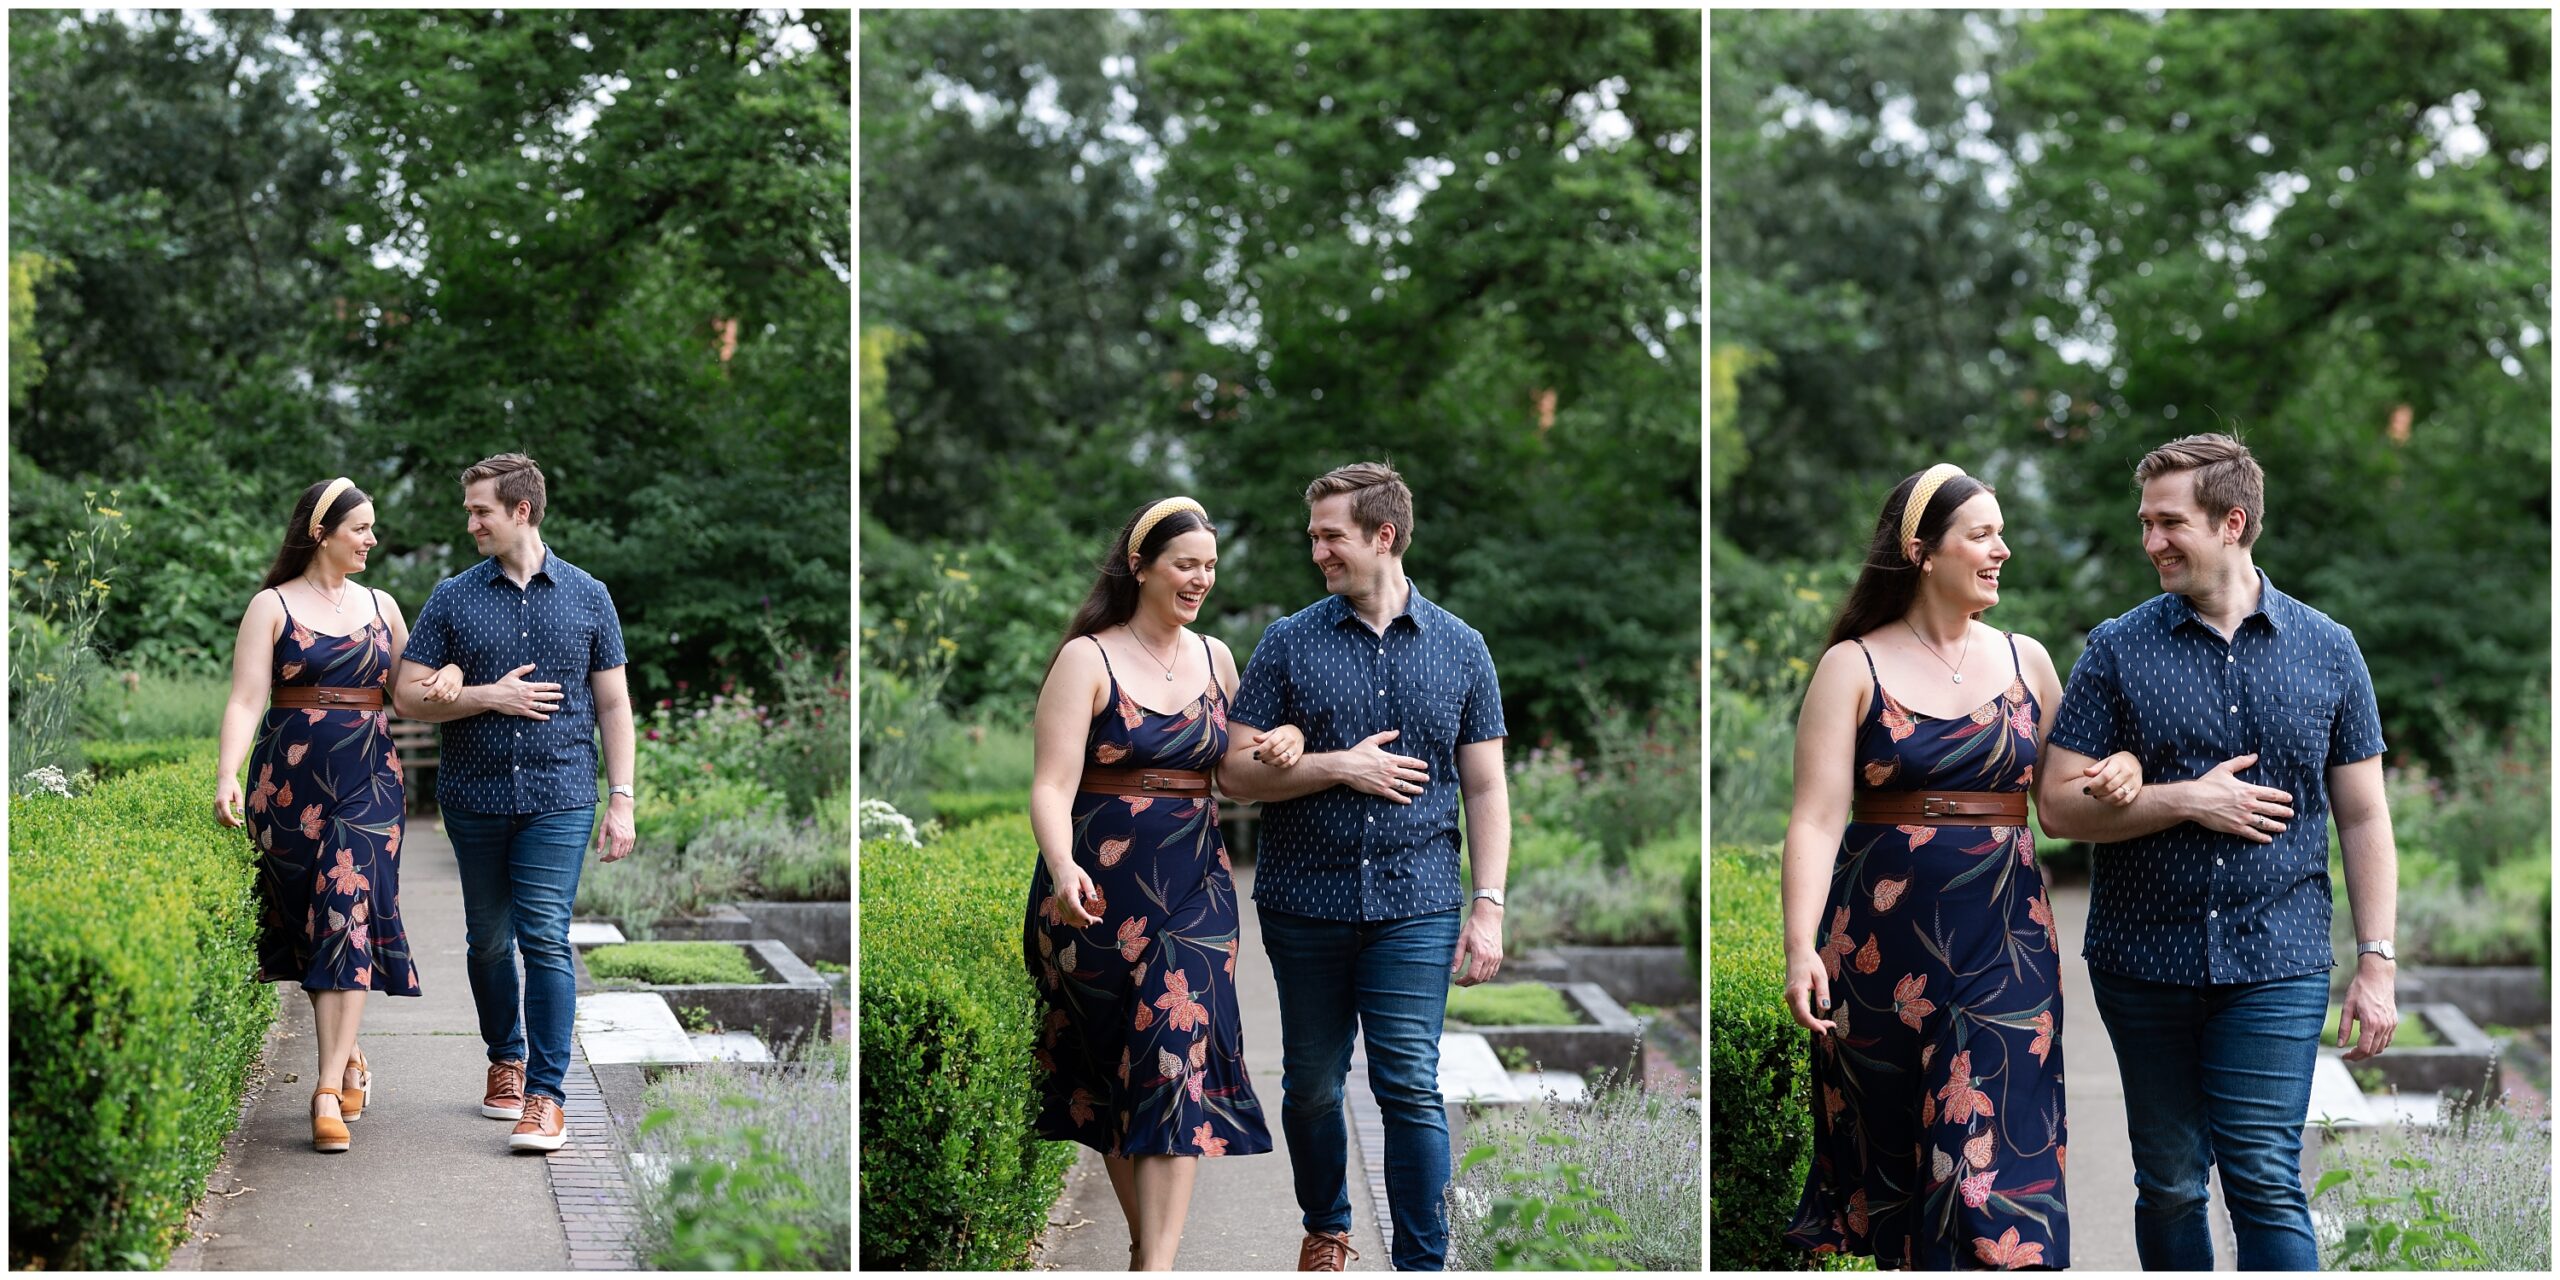 Mellon Park Engagement Session in Pittsburgh, PA photographed by Pittsburgh Wedding Photographer Acevedo Weddings